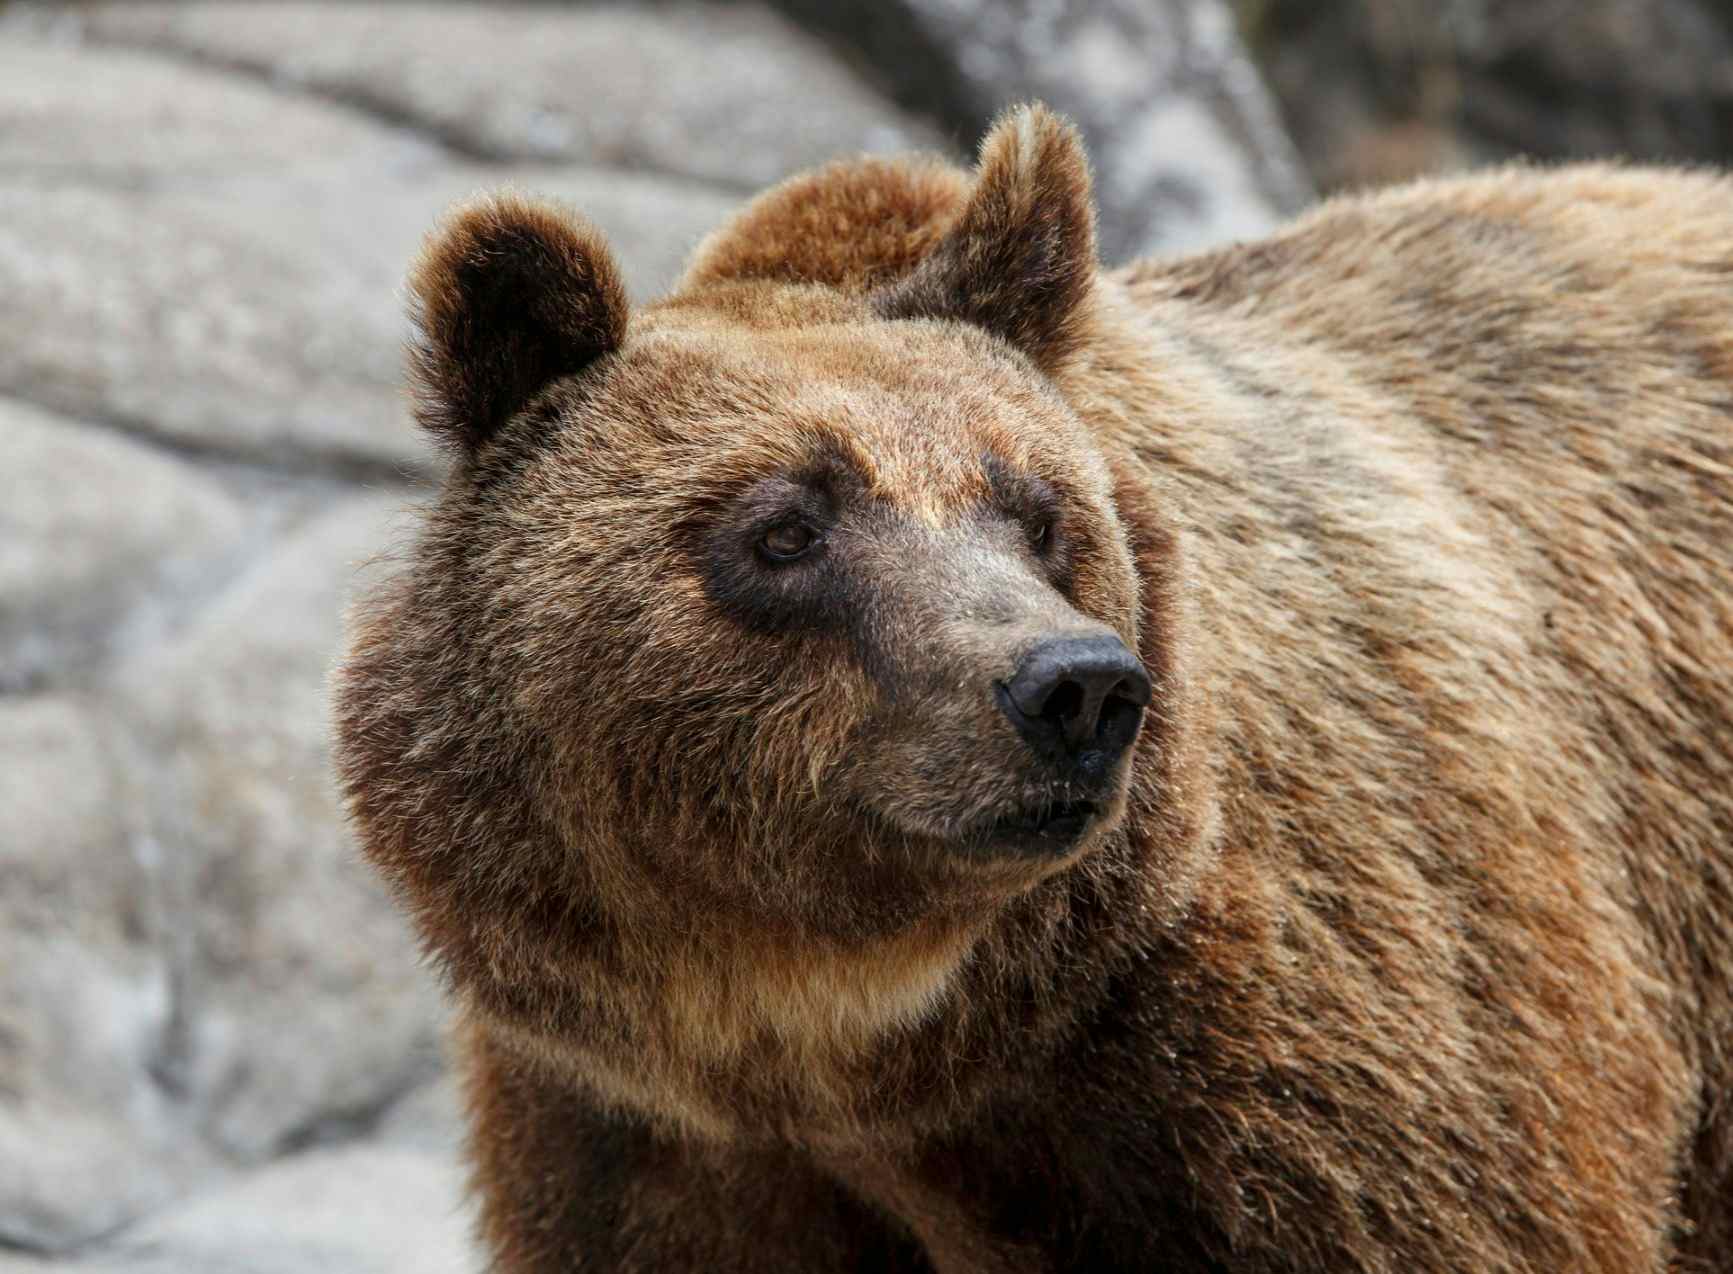 How Hiking is Helping the Wild Brown Bears in the Mountains of Greece